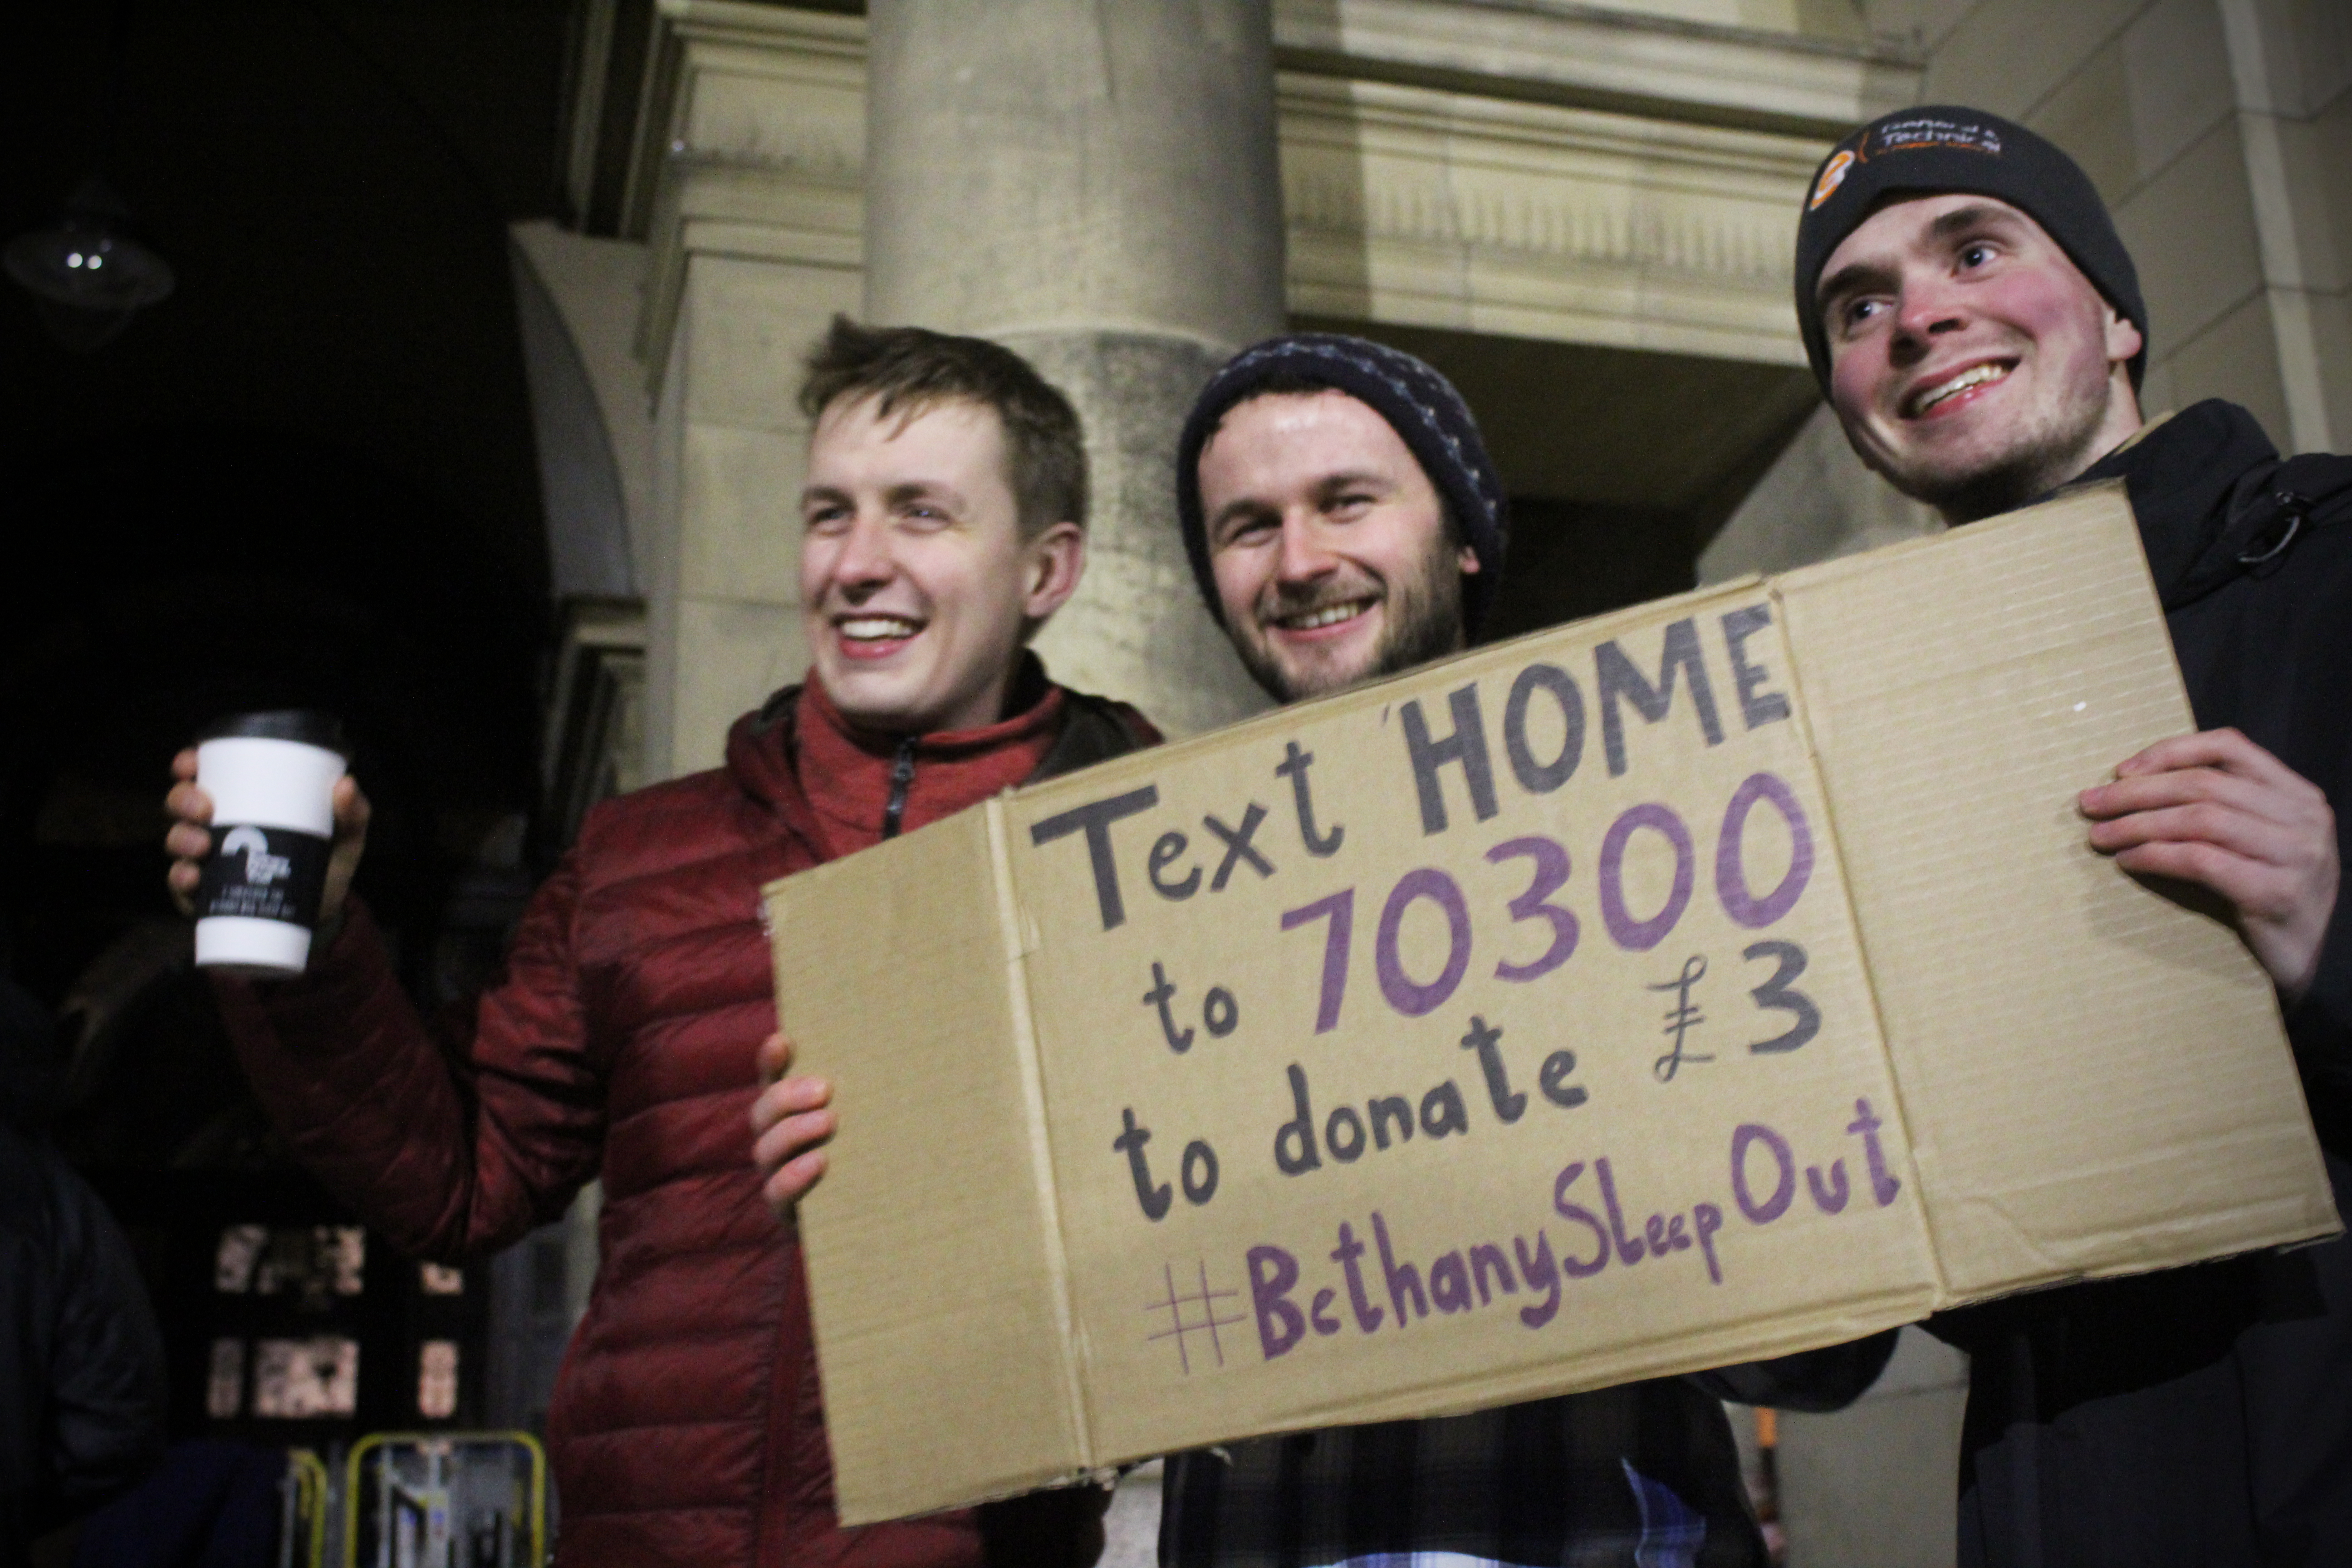 Fundraisers to Sleep Out and speak out against homelessness in Fife